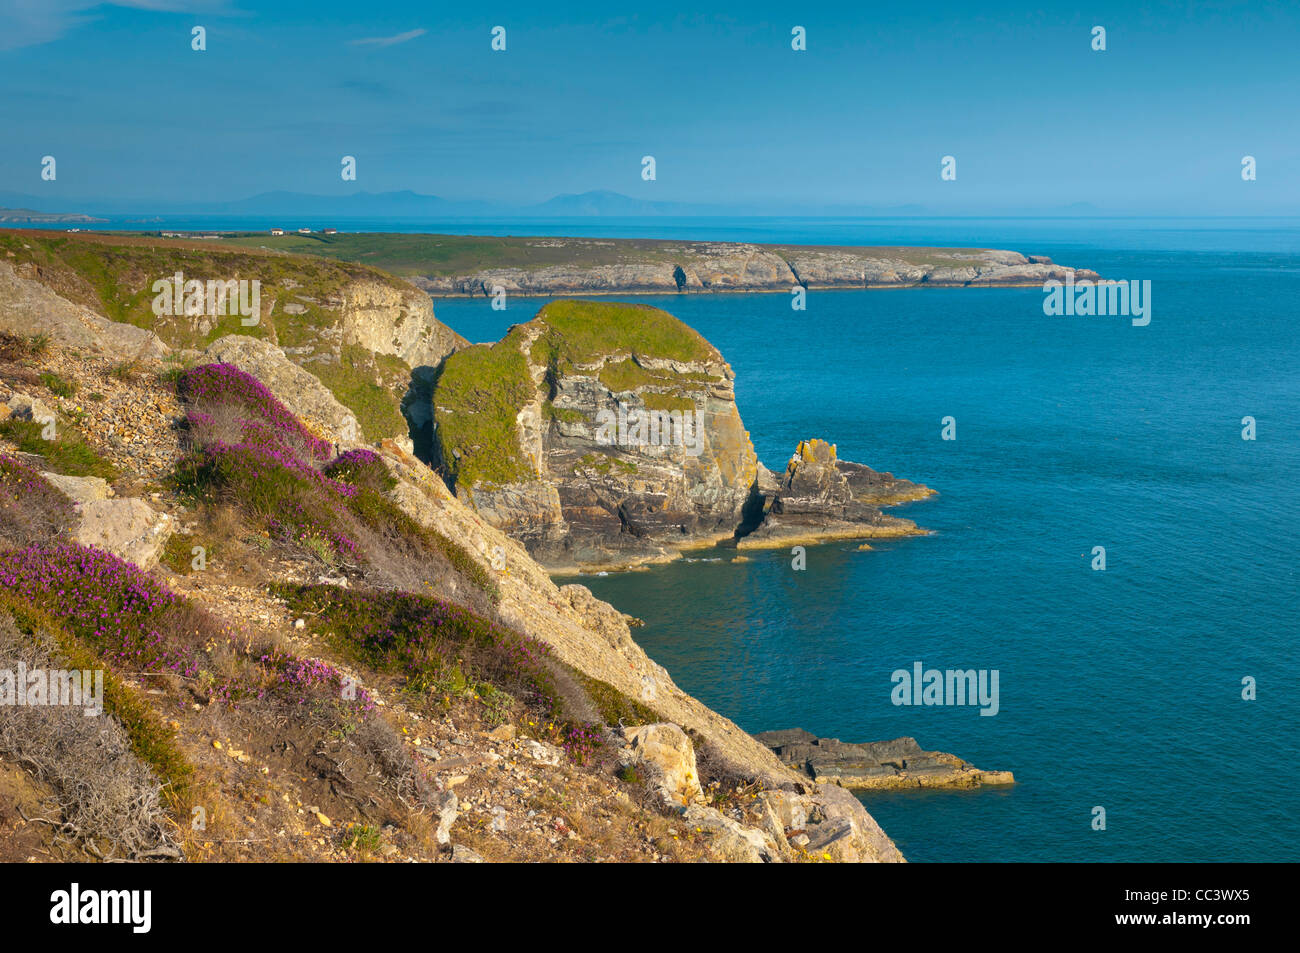 England, Wales, Anglesey, heilige Insel, in der Nähe von South Stack Lighthouse Stockfoto